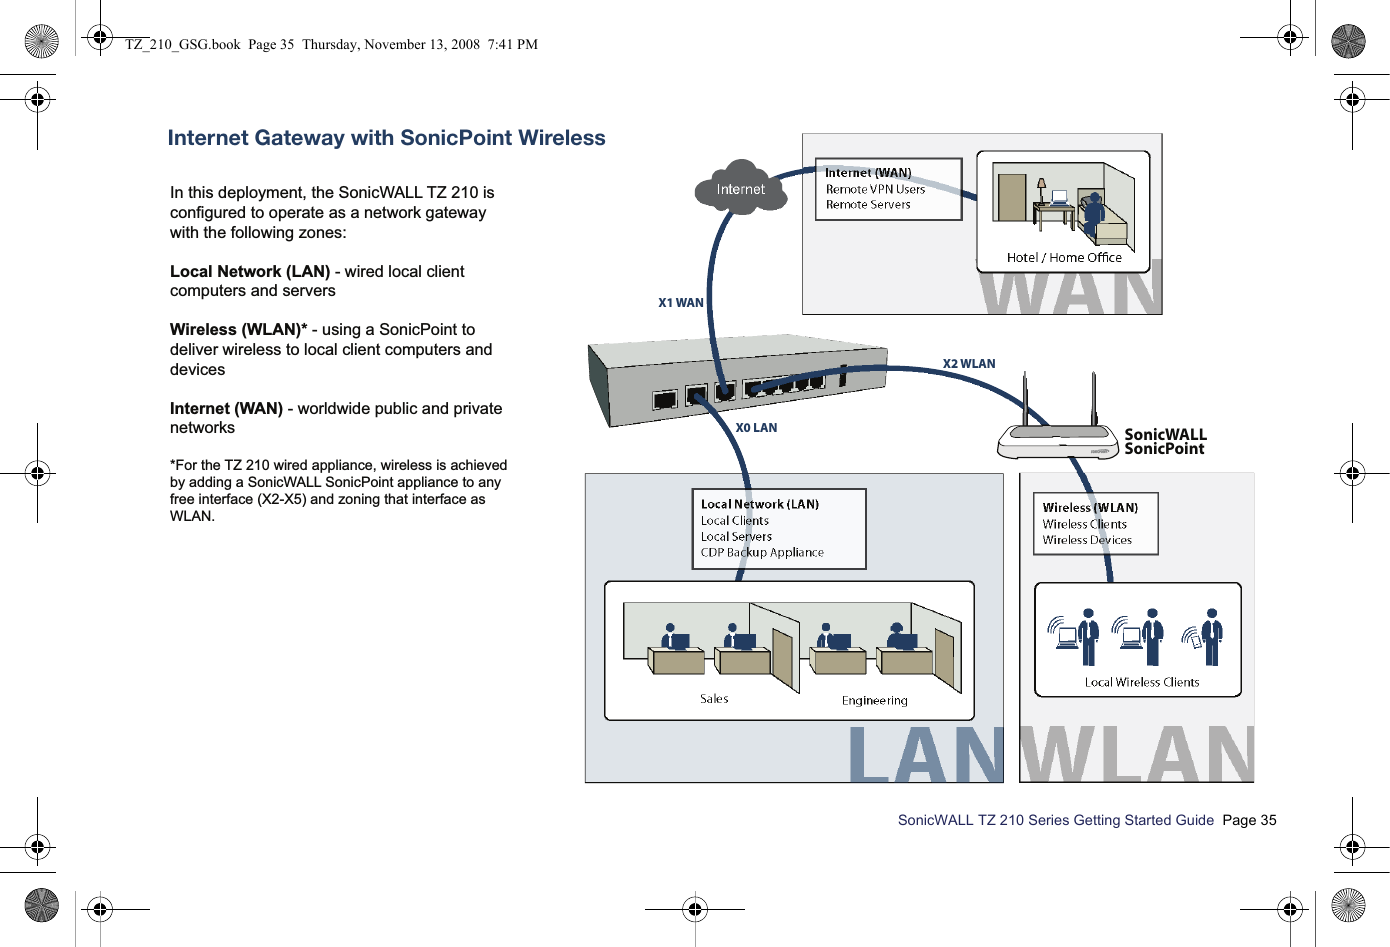 SonicWALL TZ 210 Series Getting Started Guide  Page 35Wireless ClientsWireless DevicesWireless (WLAN)Hotel / Home OceLocal Wireless ClientsSales EngineeringX1 WANX2 WLANX0 LANIn this deployment, the SonicWALL TZ 210 is configured to operate as a network gateway with the following zones:Local Network (LAN) - wired local client computers and serversWireless (WLAN)* - using a SonicPoint to deliver wireless to local client computers and devicesInternet (WAN) - worldwide public and private networks*For the TZ 210 wired appliance, wireless is achieved by adding a SonicWALL SonicPoint appliance to any free interface (X2-X5) and zoning that interface as WLAN.Internet Gateway with SonicPoint WirelessSonicWALLSonicPointSONICPOINTTZ_210_GSG.book  Page 35  Thursday, November 13, 2008  7:41 PM